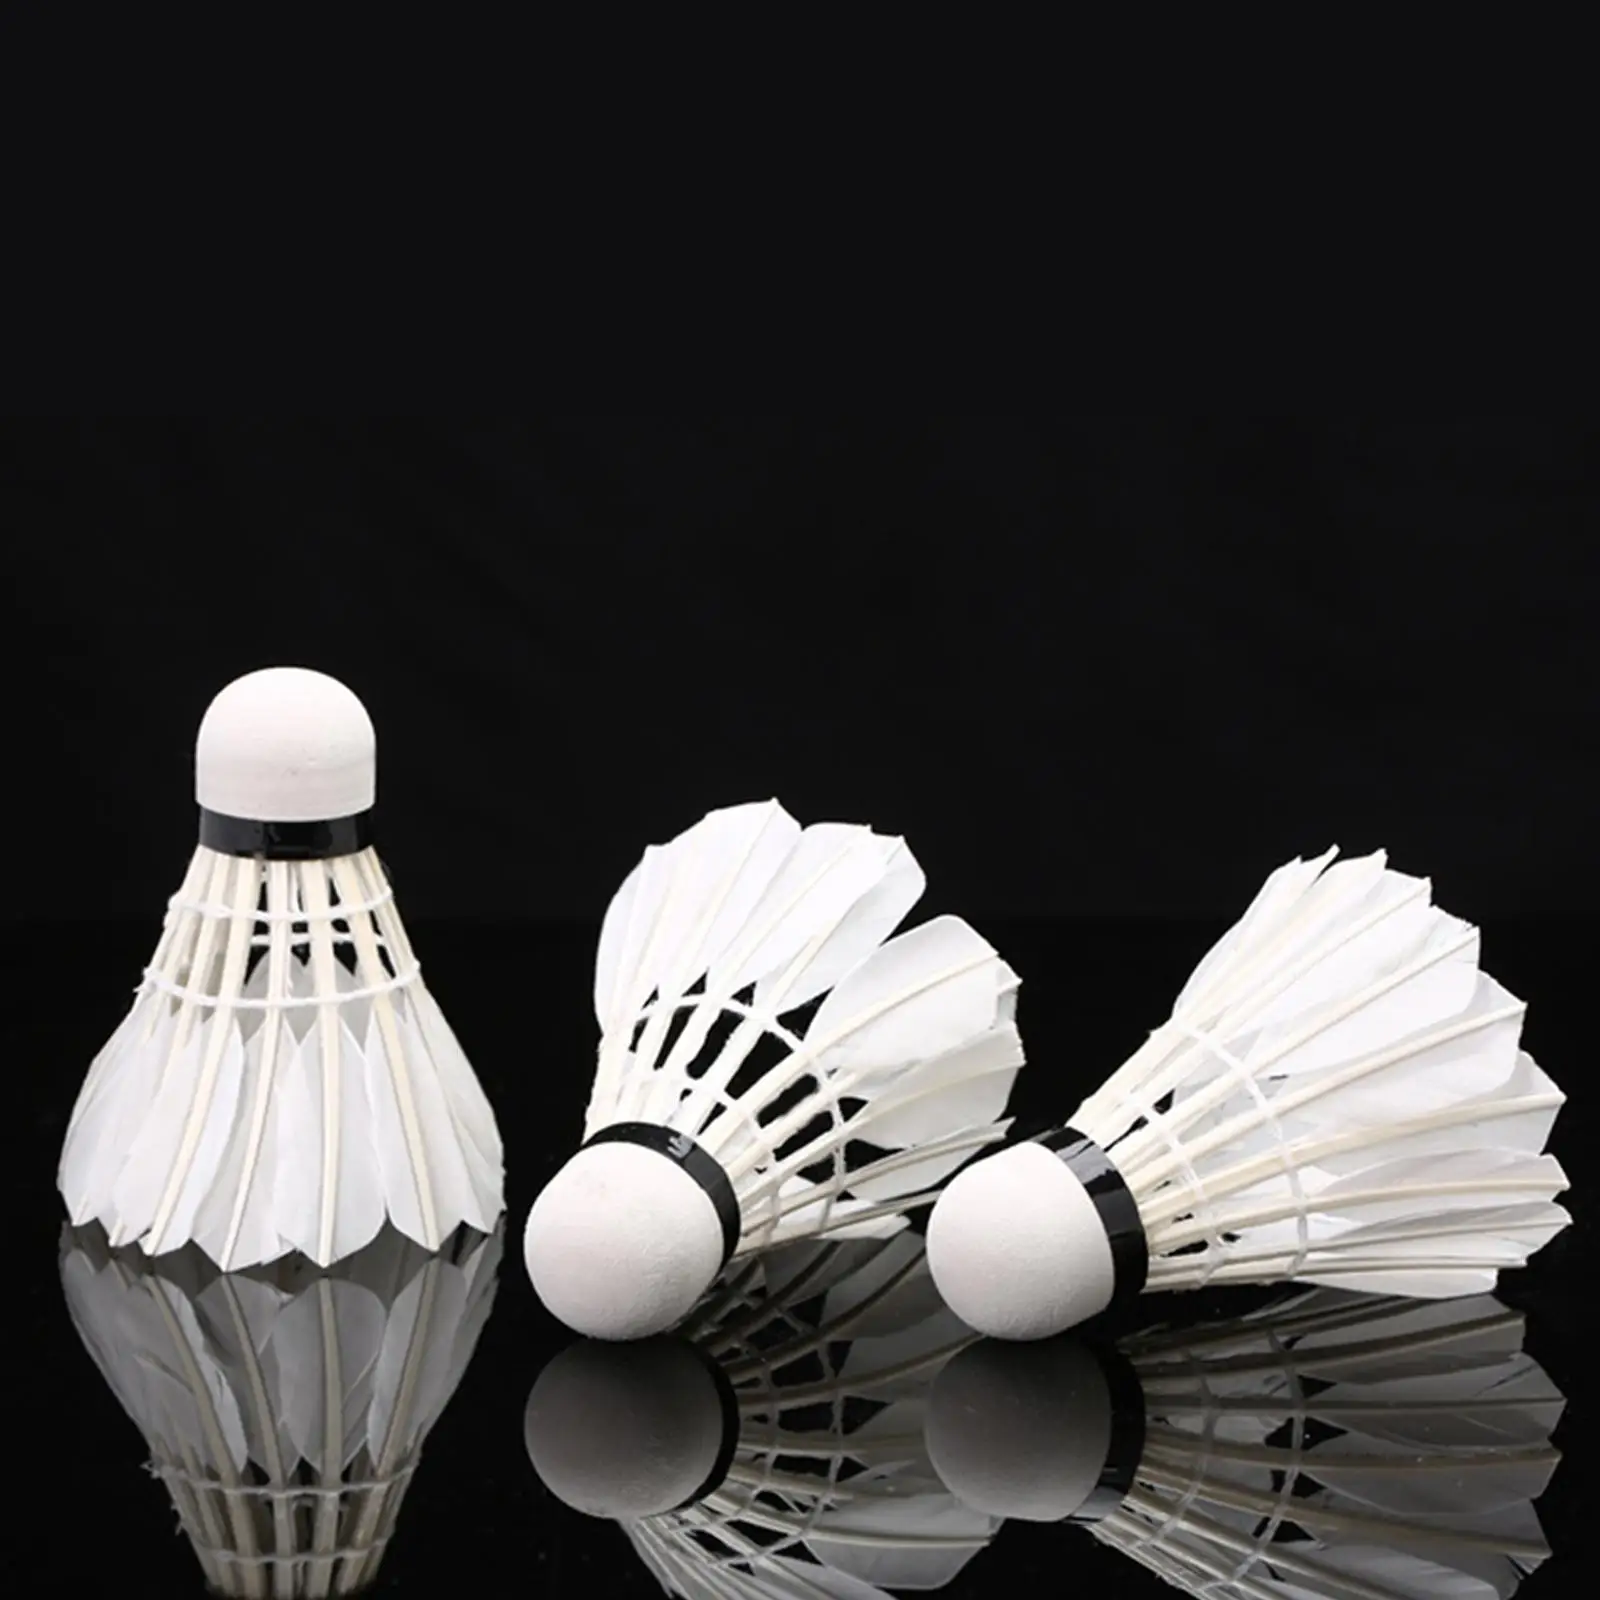 3Pcs Badminton Shuttlecocks for Recreational Game Play Sports Activities